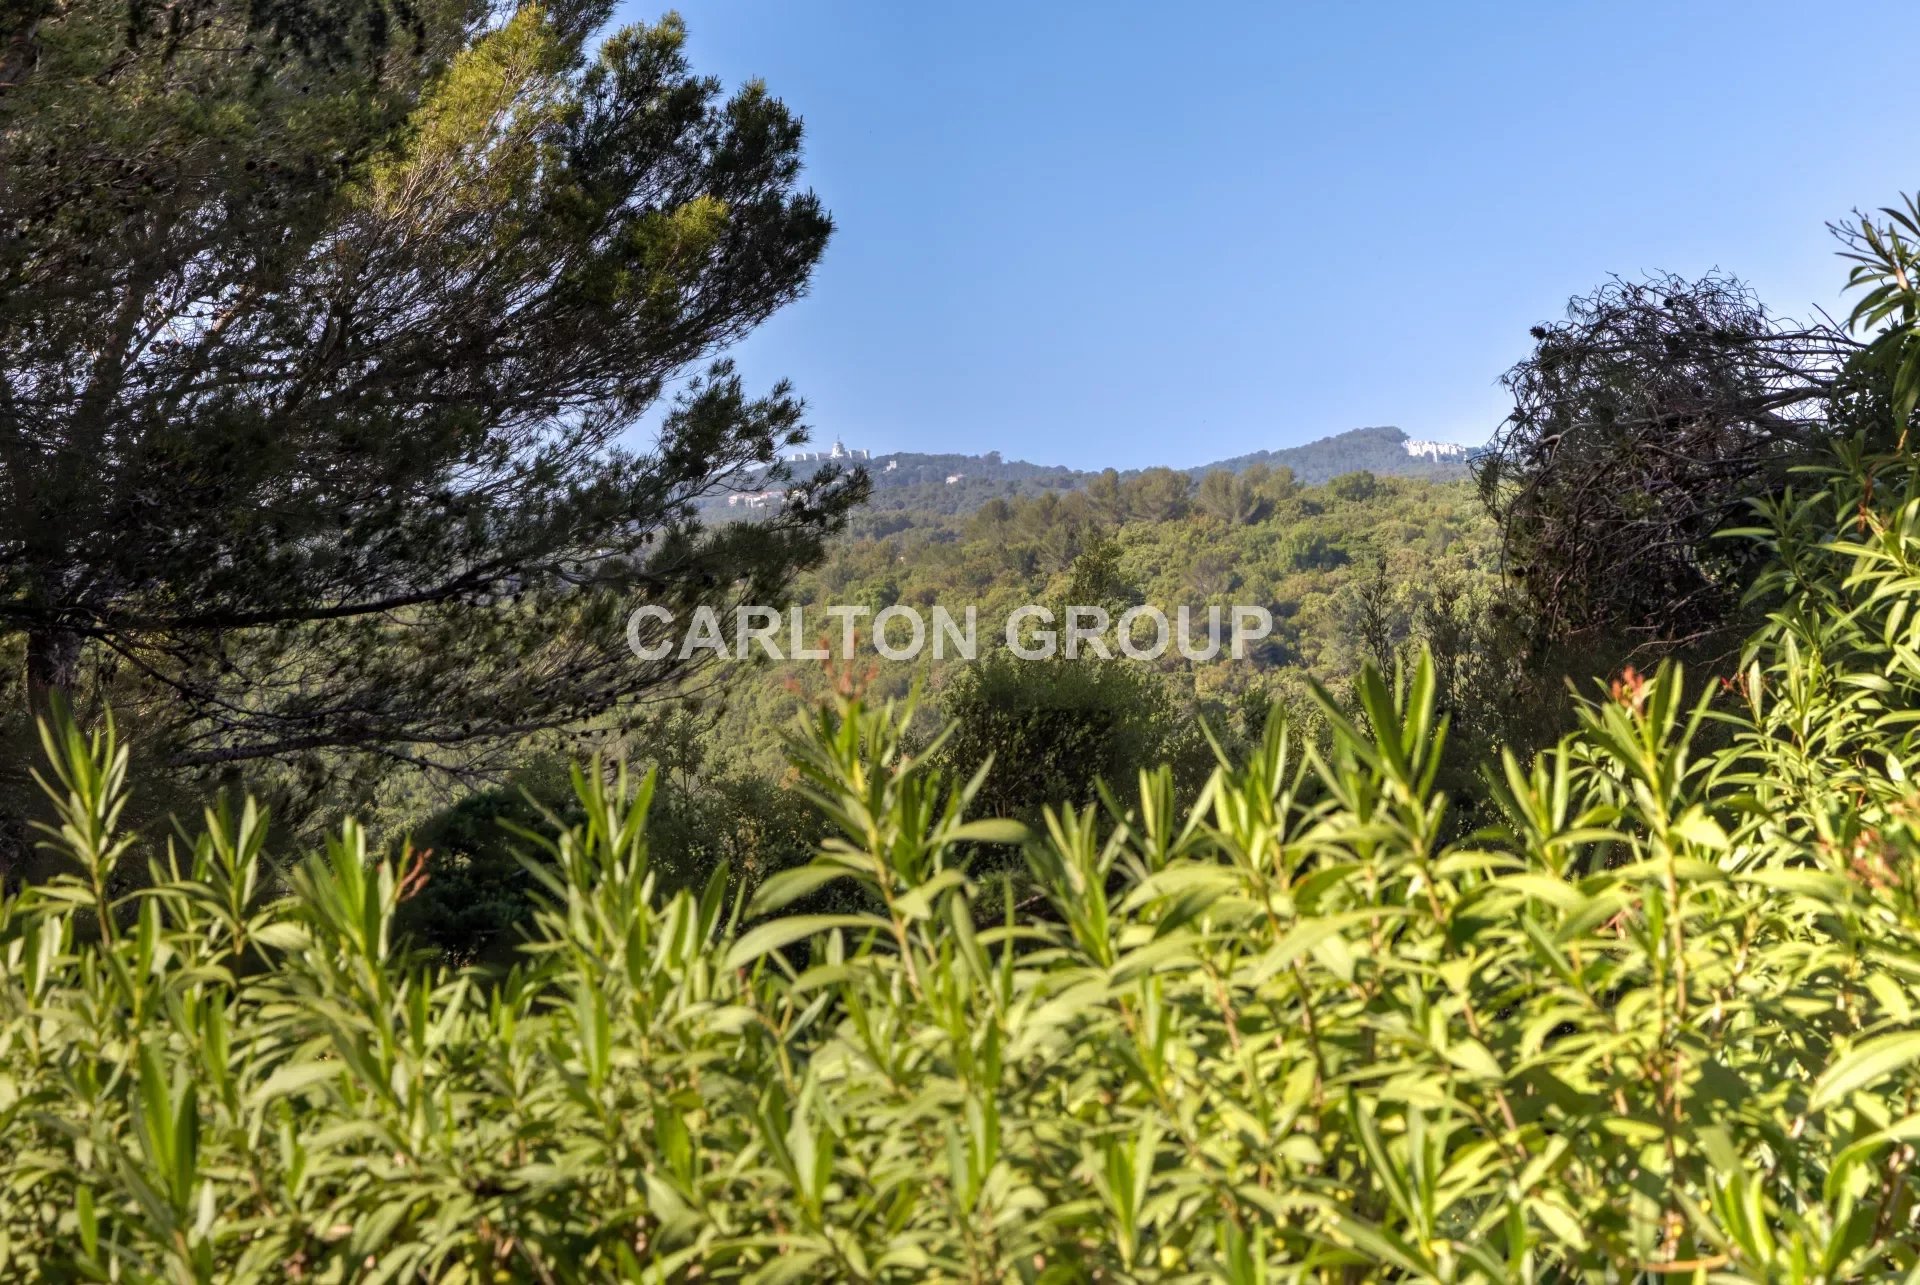 Sole Agent NEAR VALBONNE - SINGLE STOREY ECOLOGICAL VILLA WITH CONTEMPORARY INTERIOR STYLE - SEA VIEW